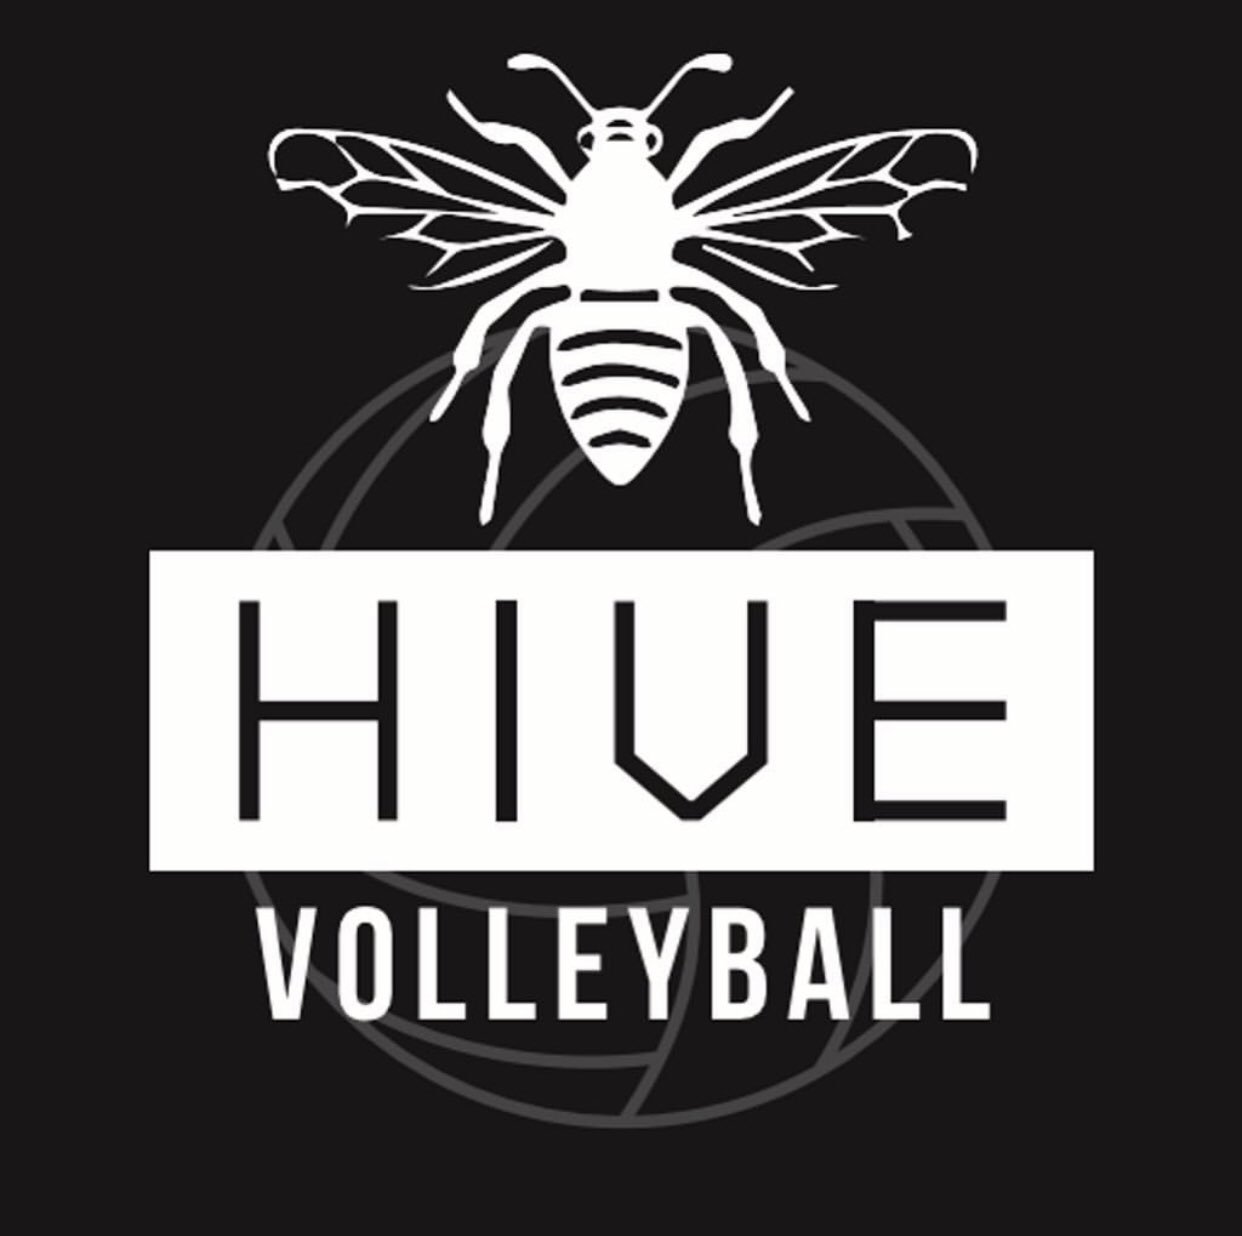 The Hive Volleyball Club